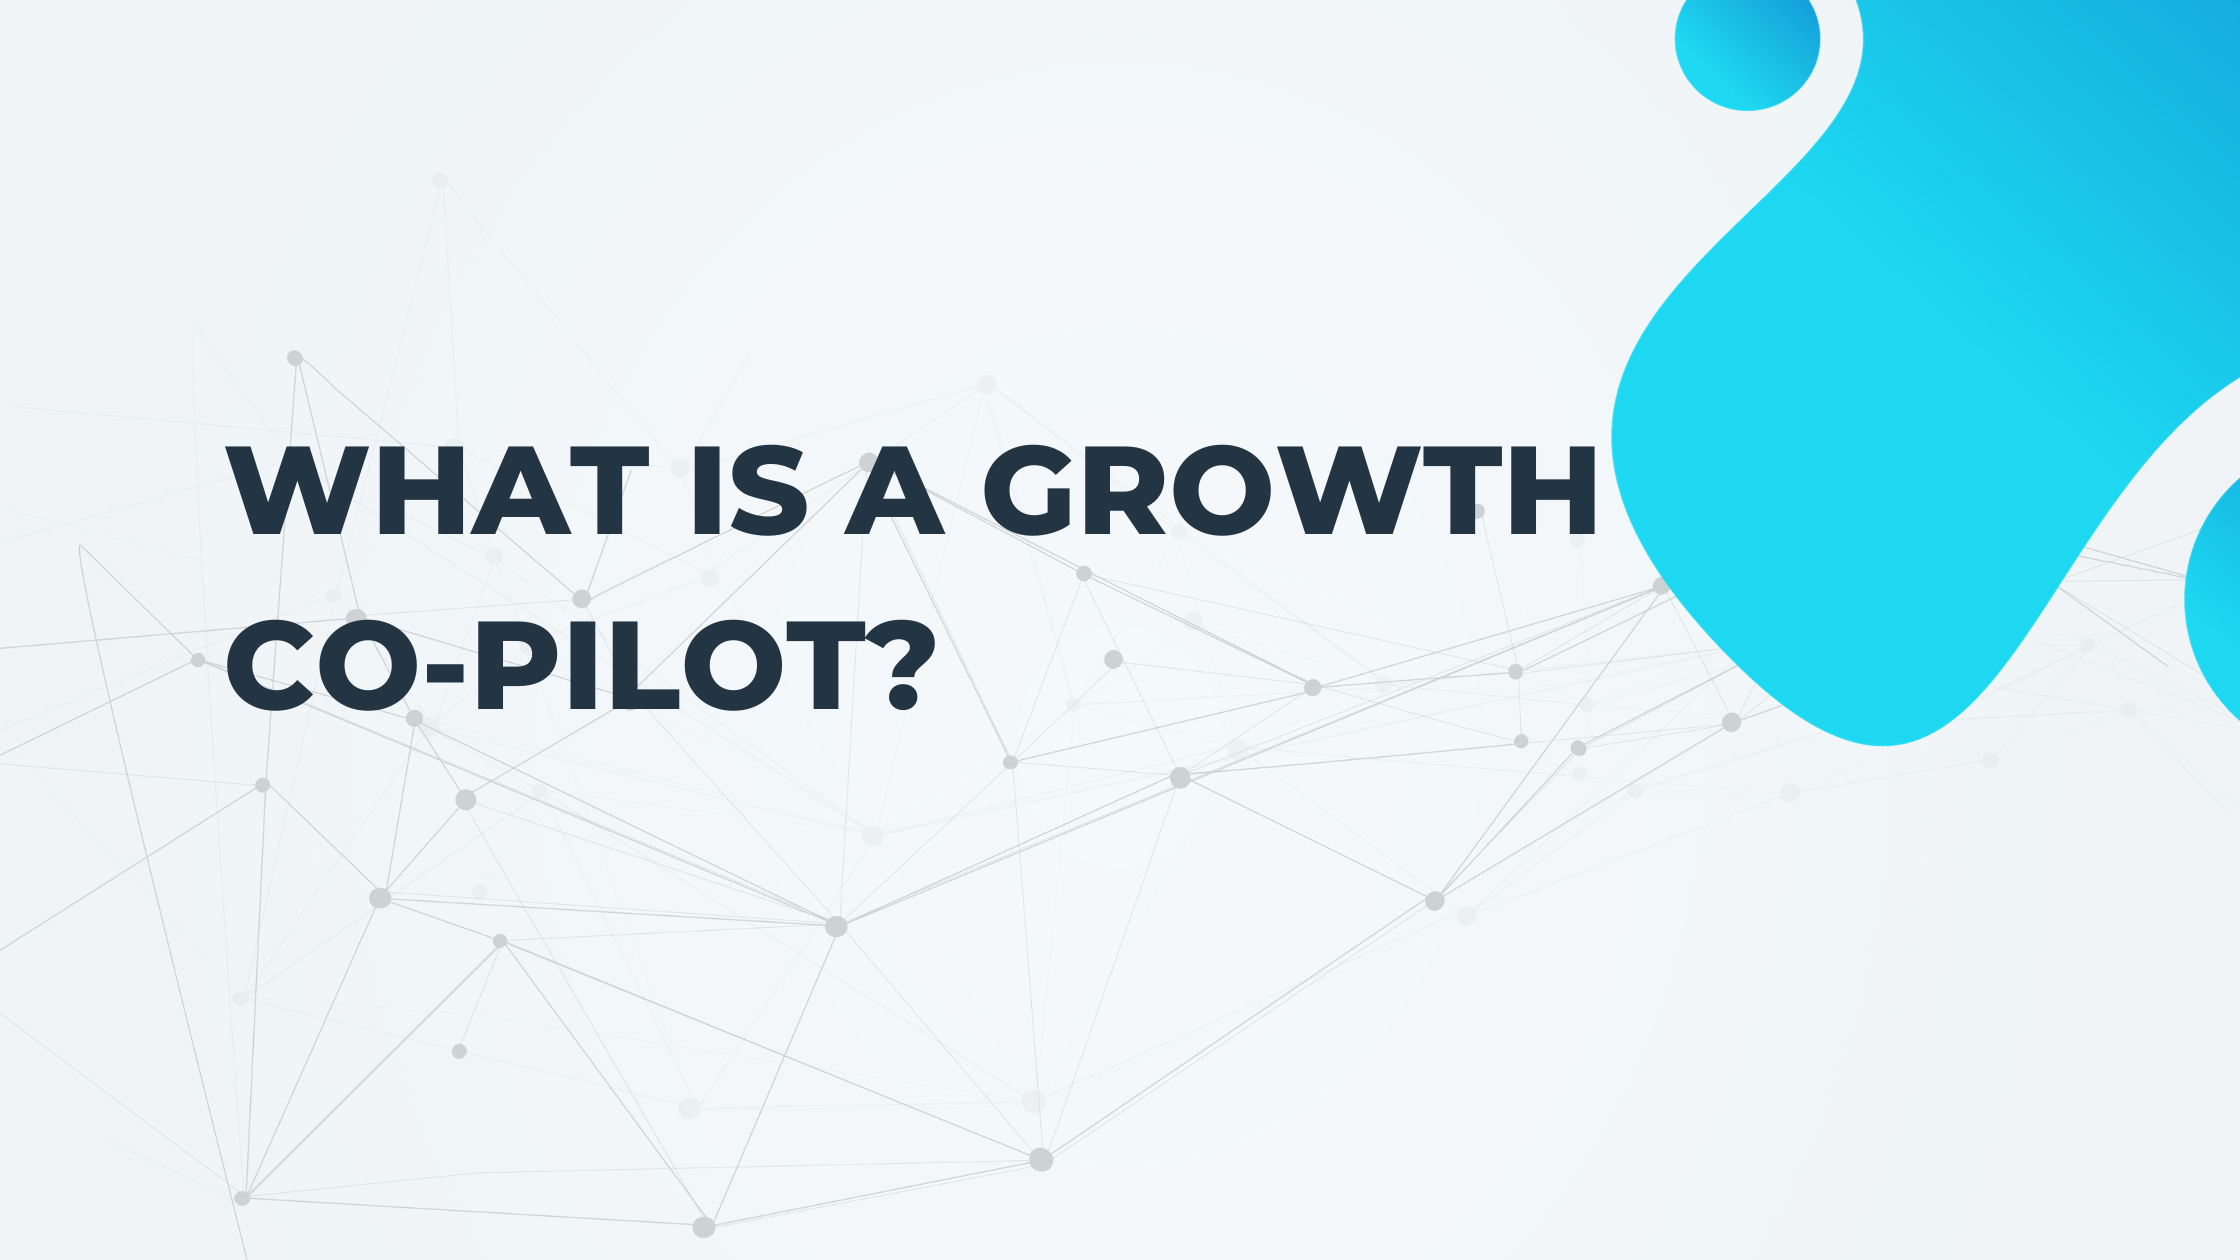 What is a growth co-pilot